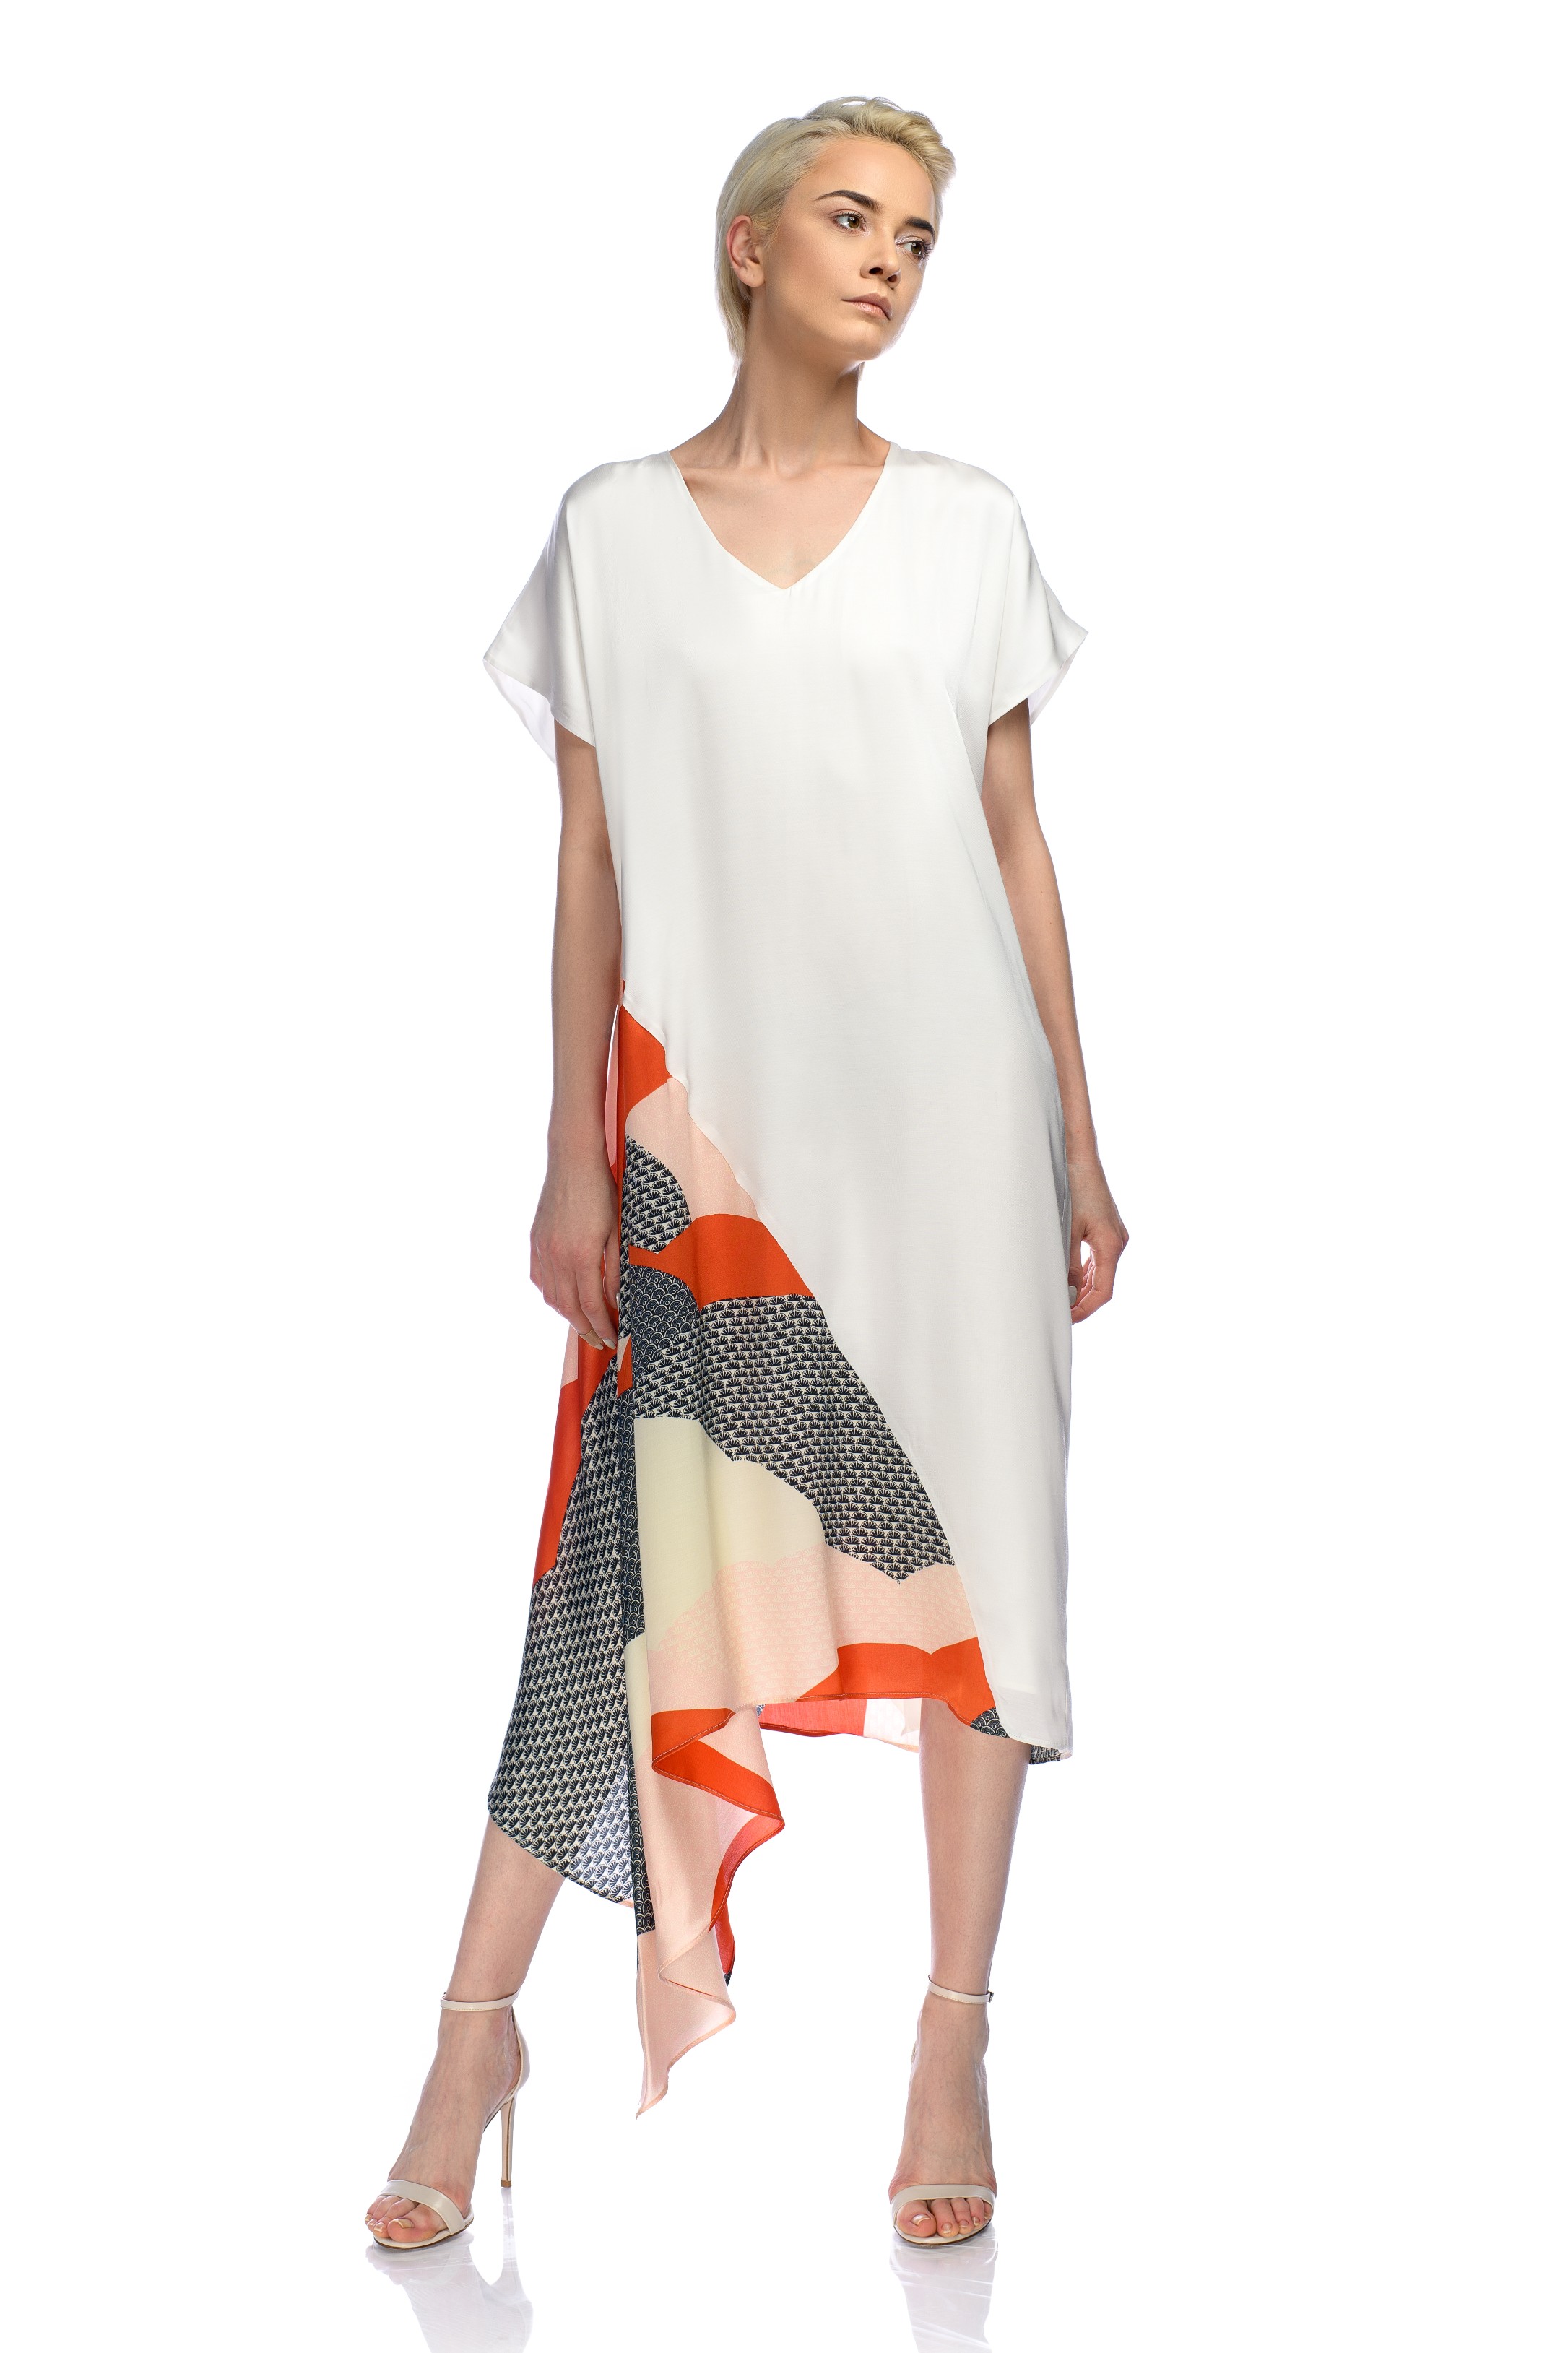 Architectural Wearable Online Shop | Fashion and Accessories| - NORR dress